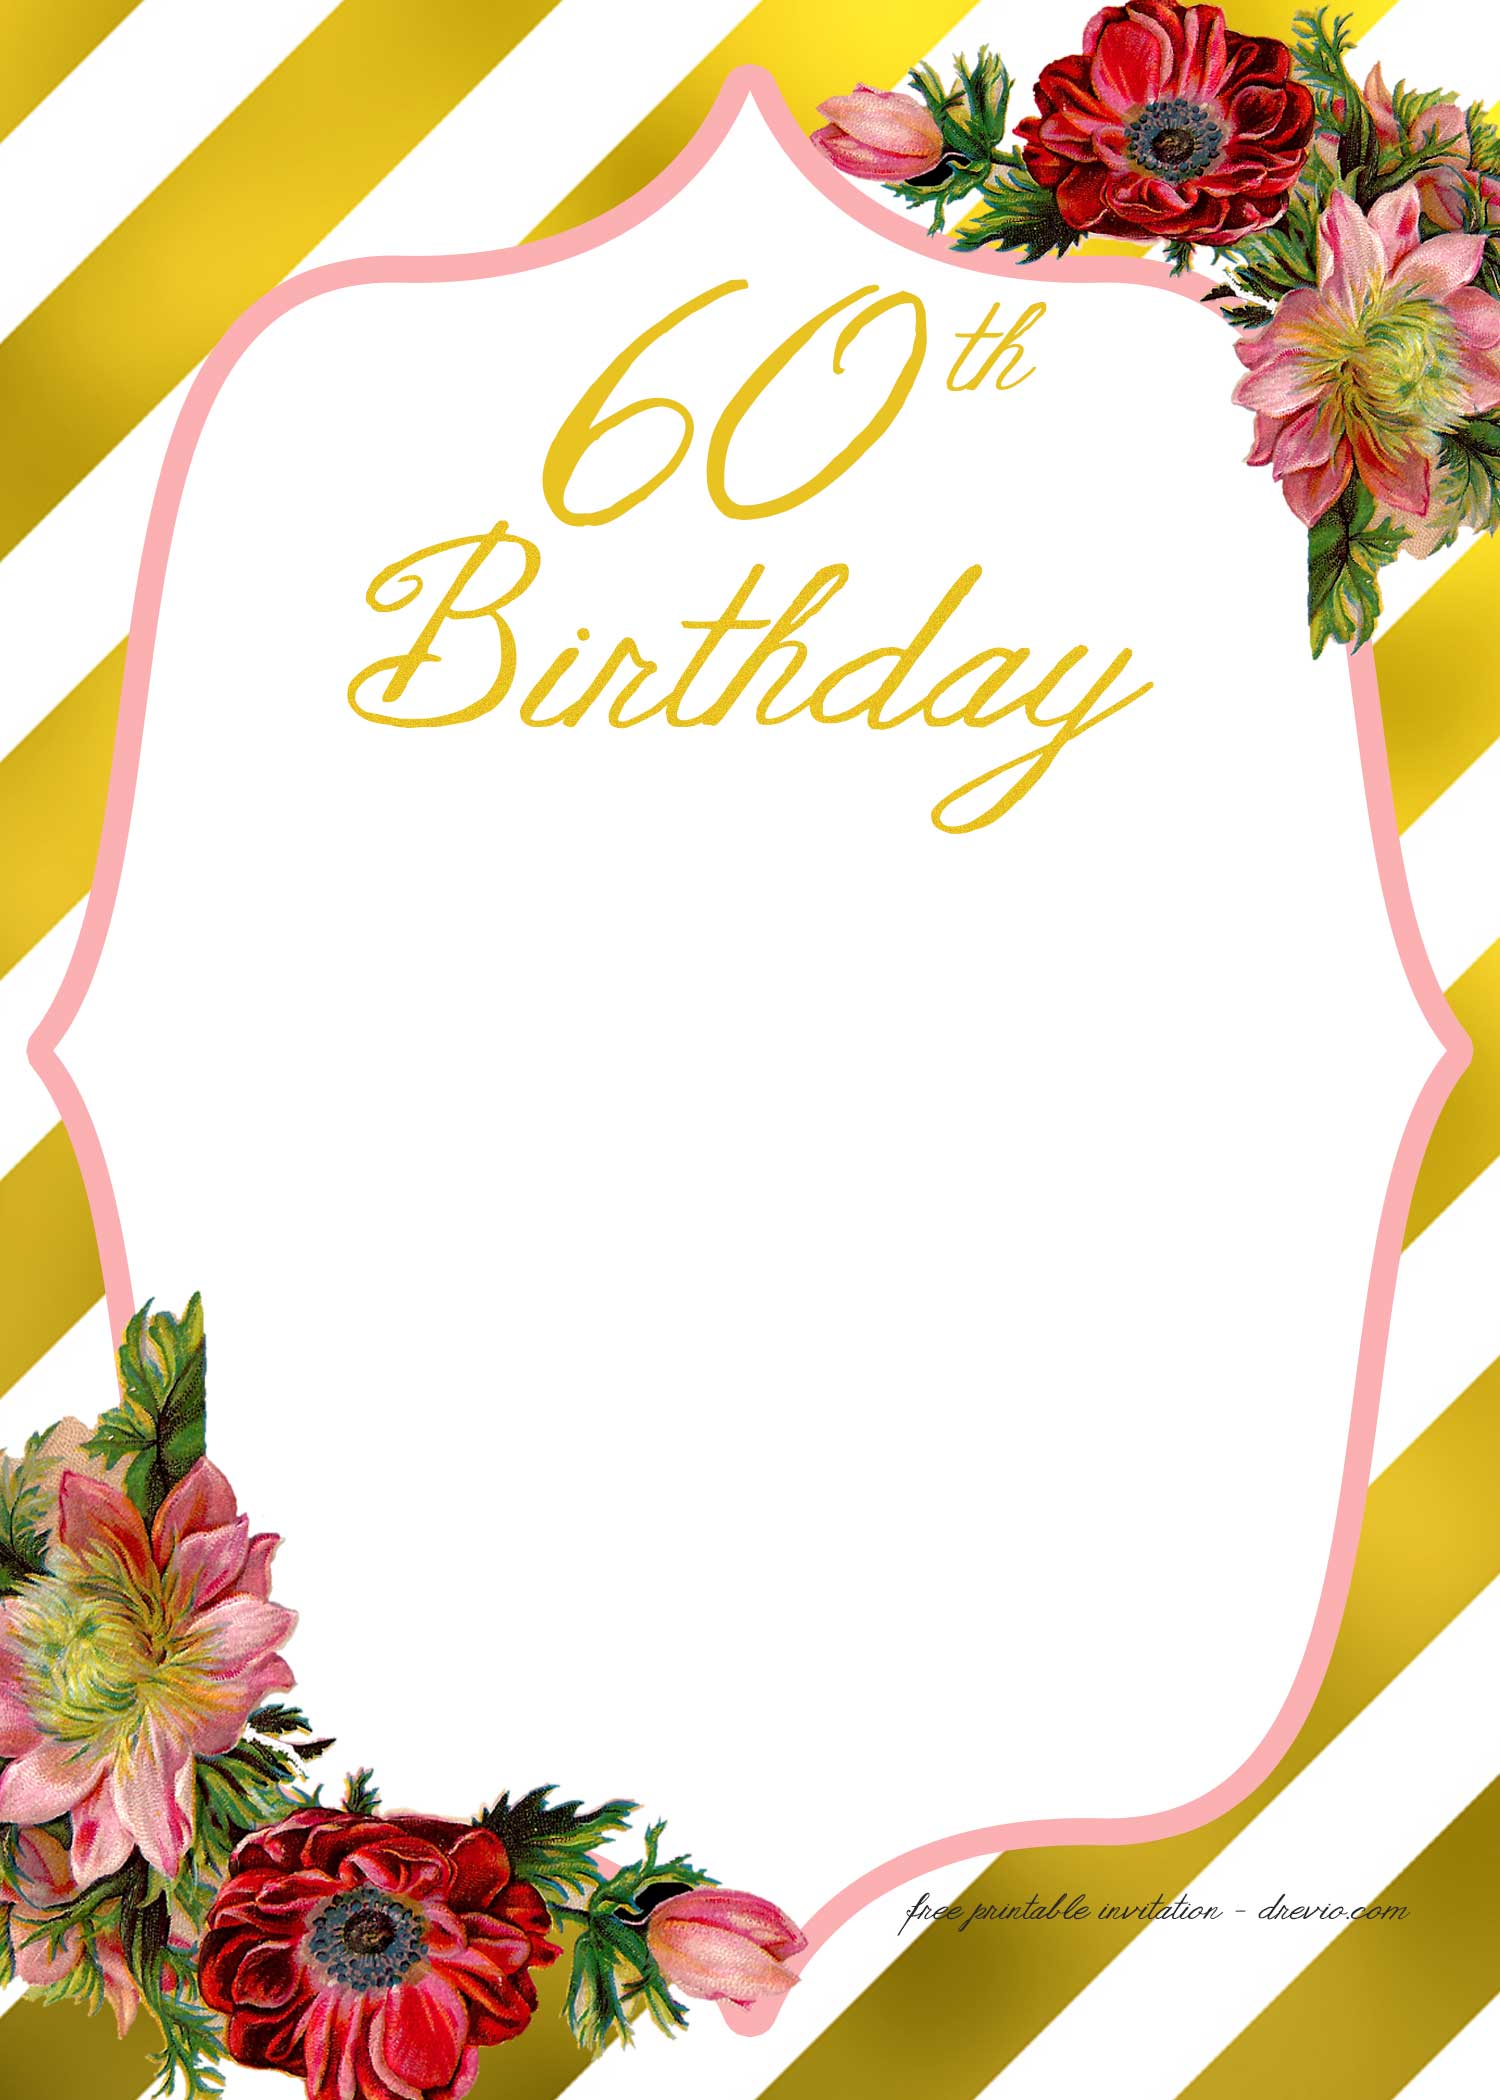 adult-birthday-invitations-template-for-50th-years-old-and-up-download-hundreds-free